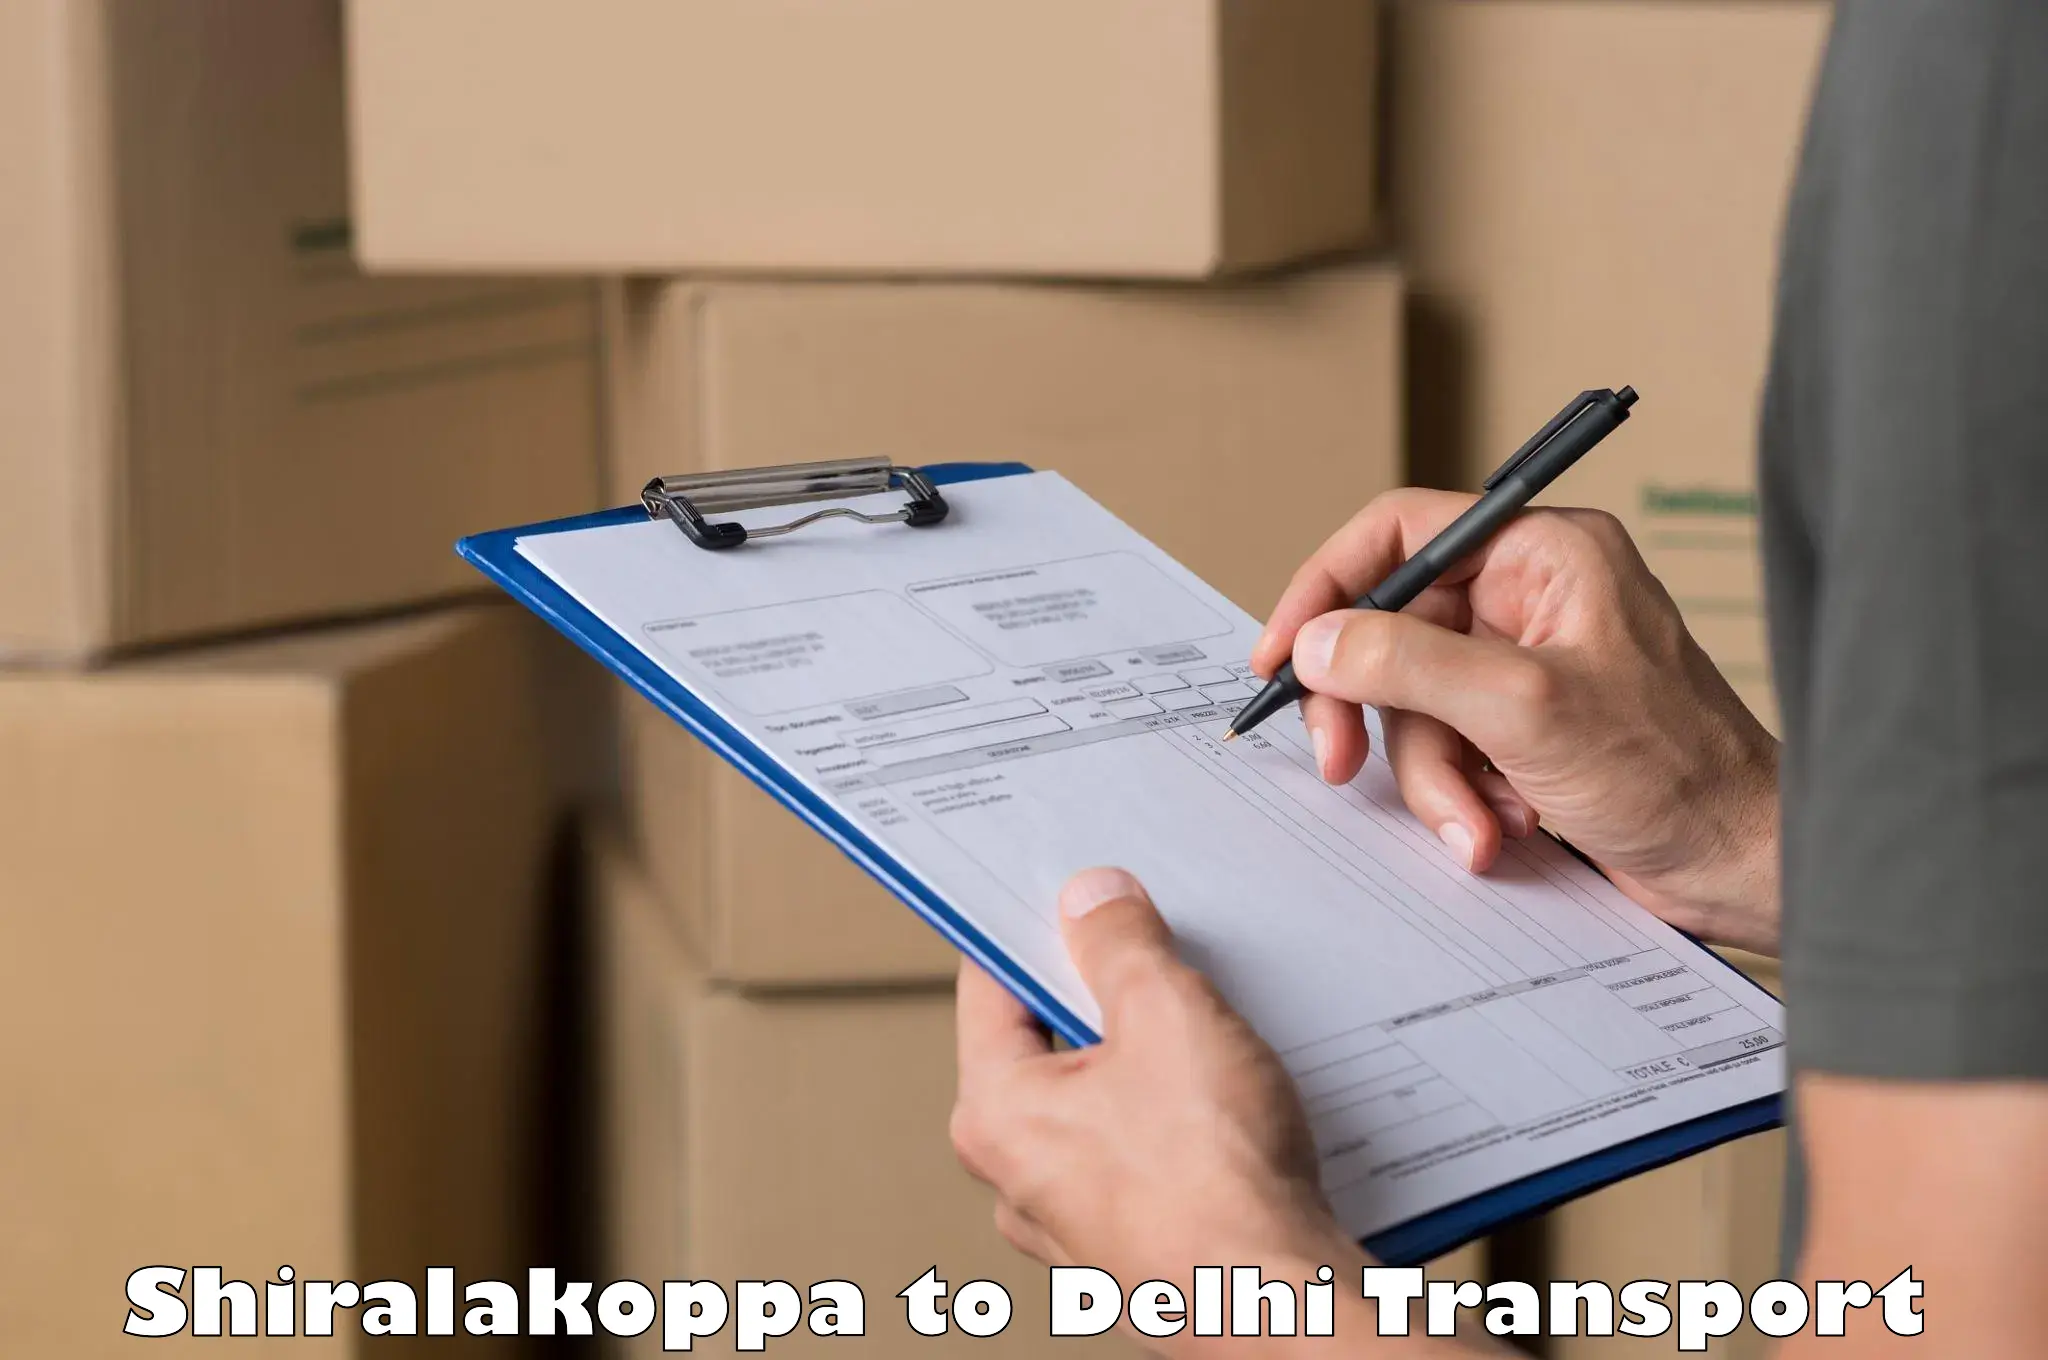 Express transport services Shiralakoppa to NCR